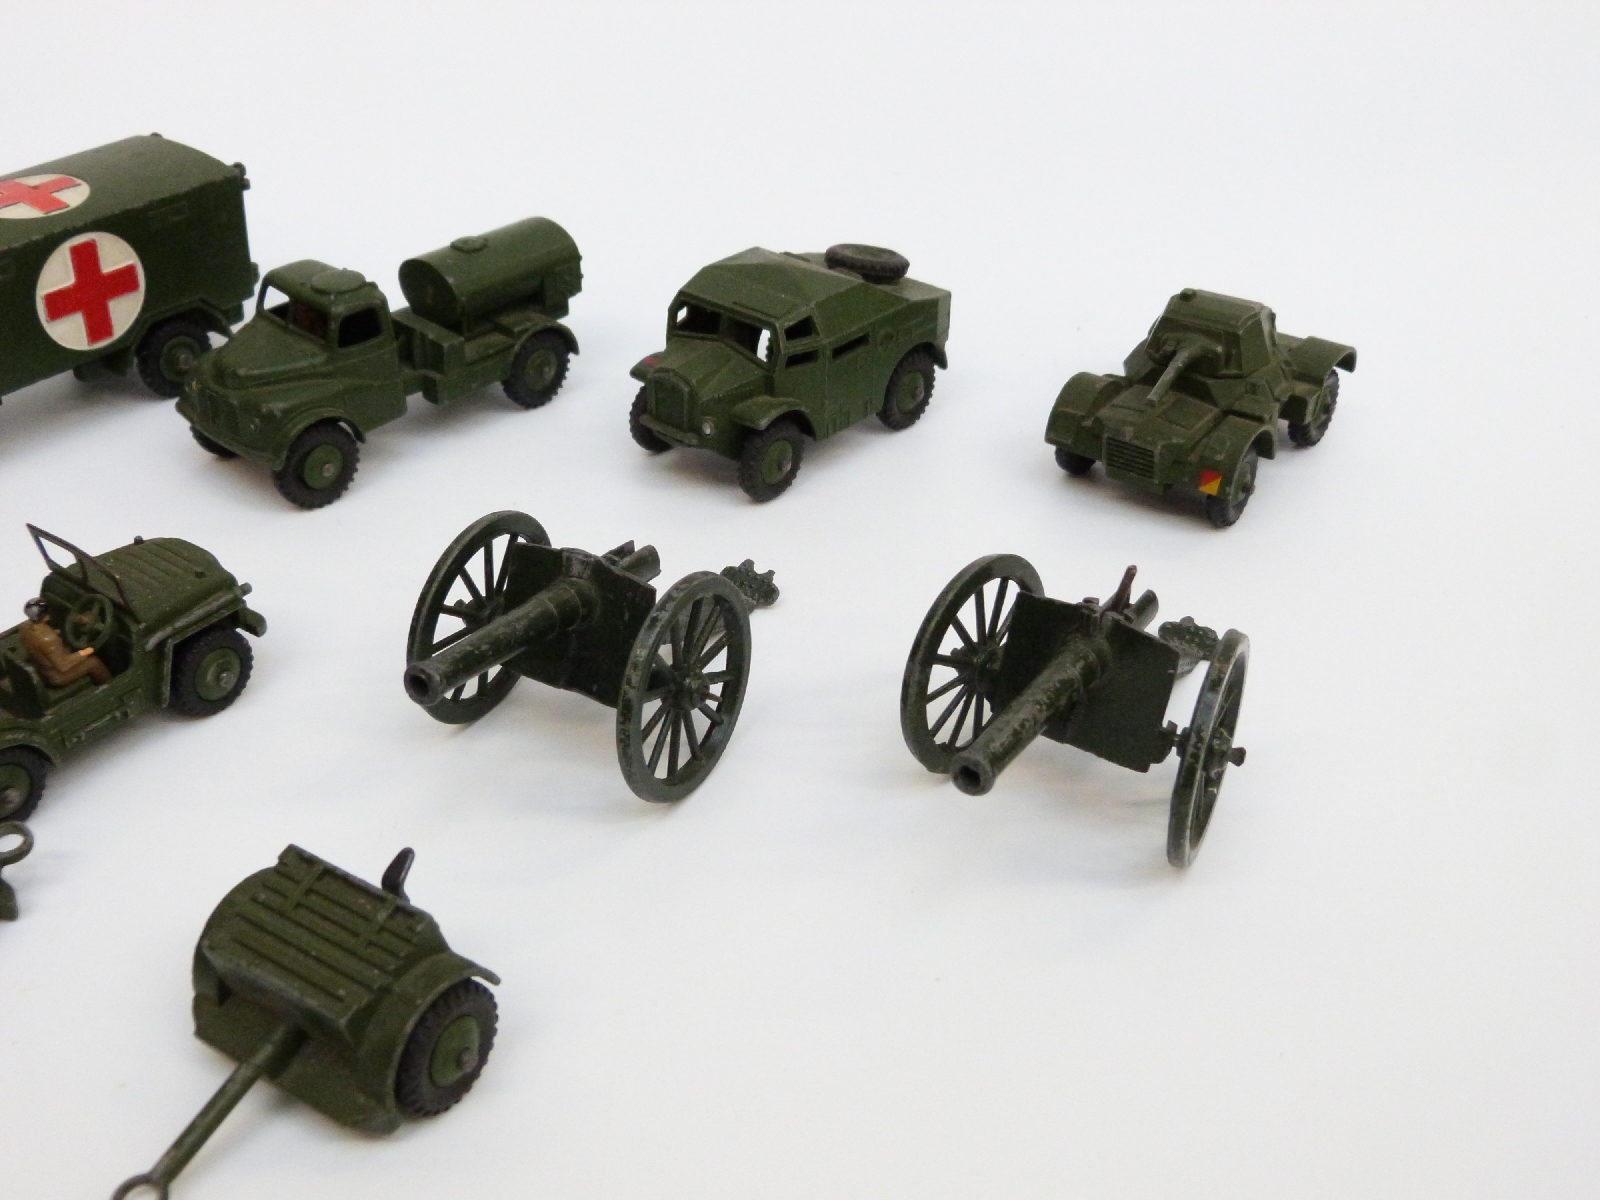 Ten Dinky Toys and Supertoys diecast model military vehicles including Military Ambulance, - Image 4 of 9